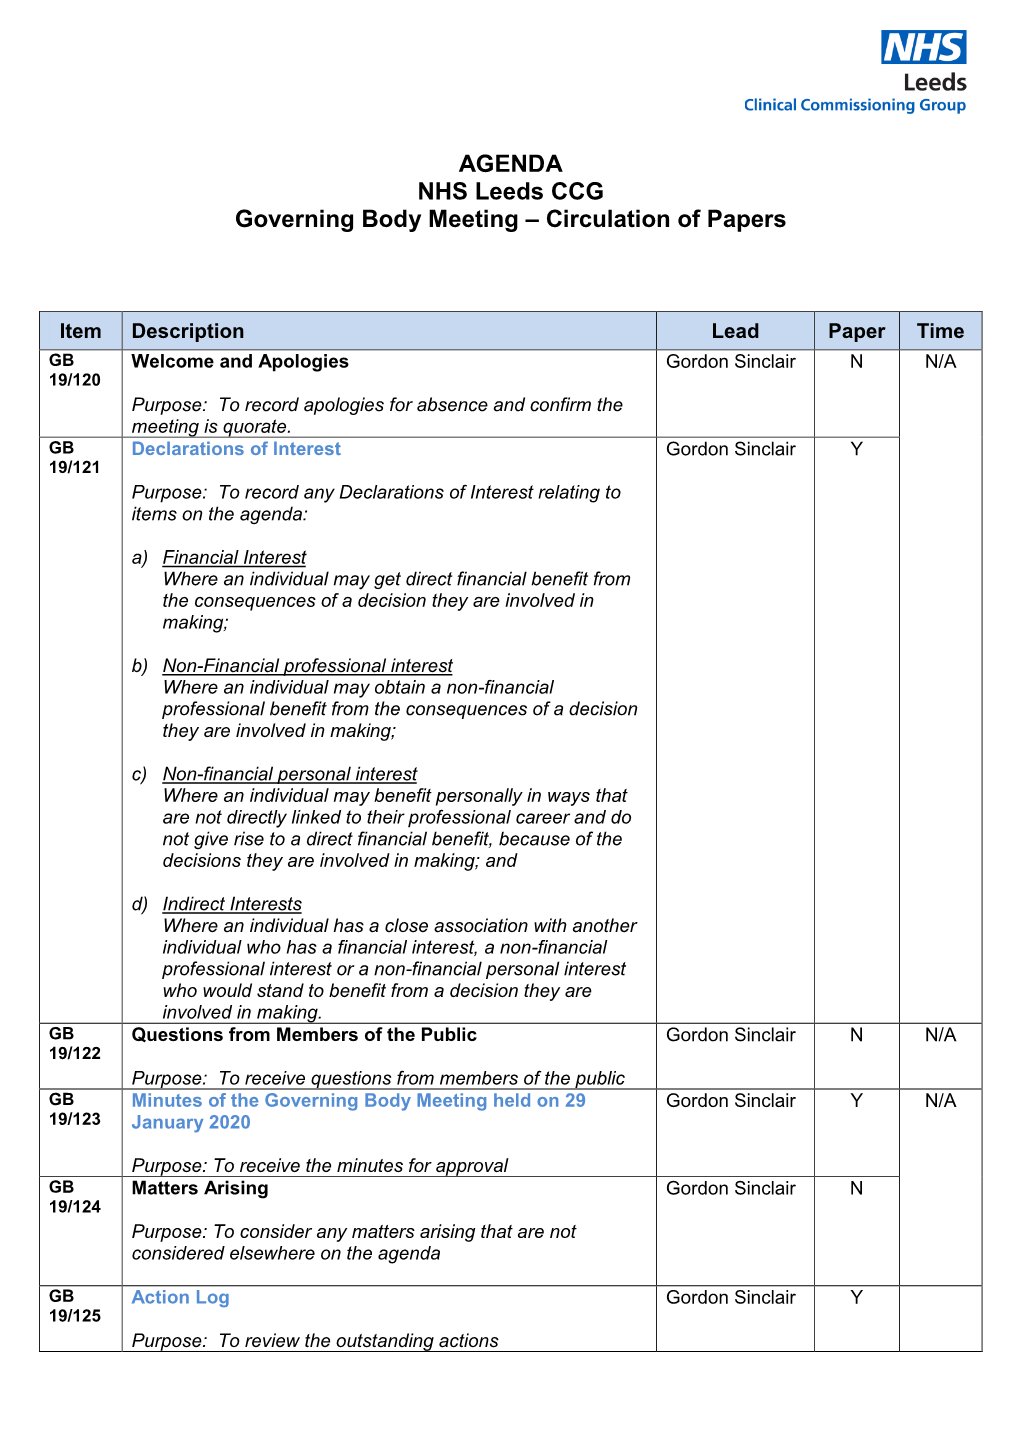 AGENDA NHS Leeds CCG Governing Body Meeting – Circulation of Papers